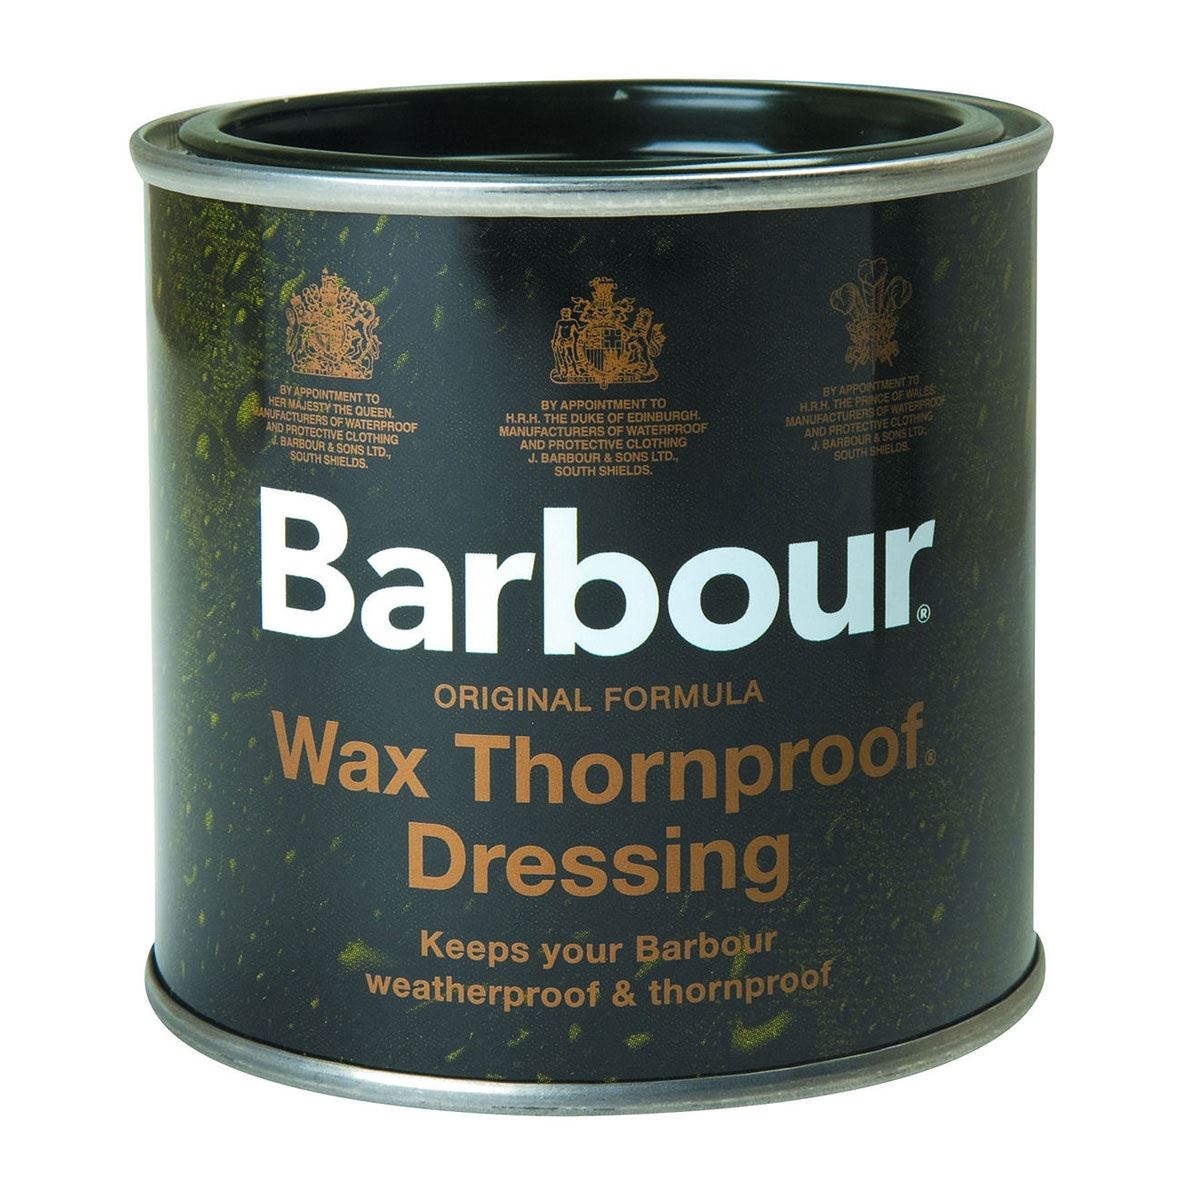 How can Barbour wax enhance longevity of their jackets?